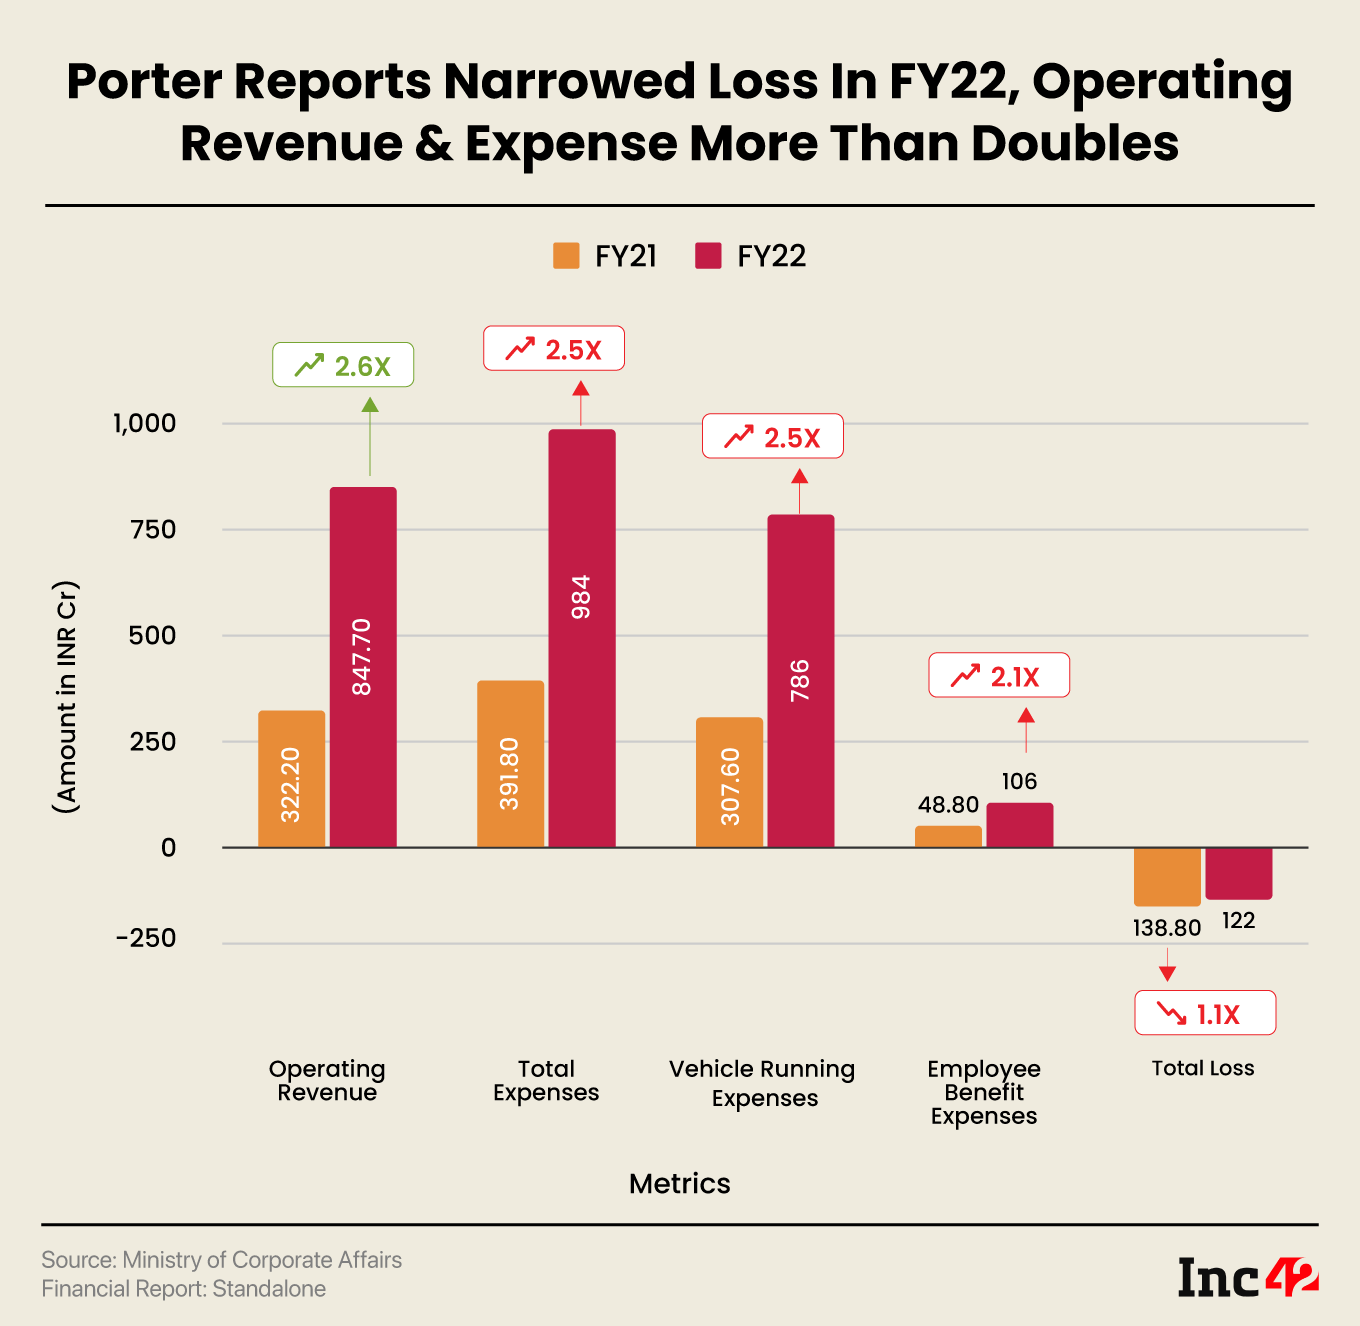  Porter Posts Loss Of INR 122 Cr In FY22, Revenue Grows 2.6X YoY